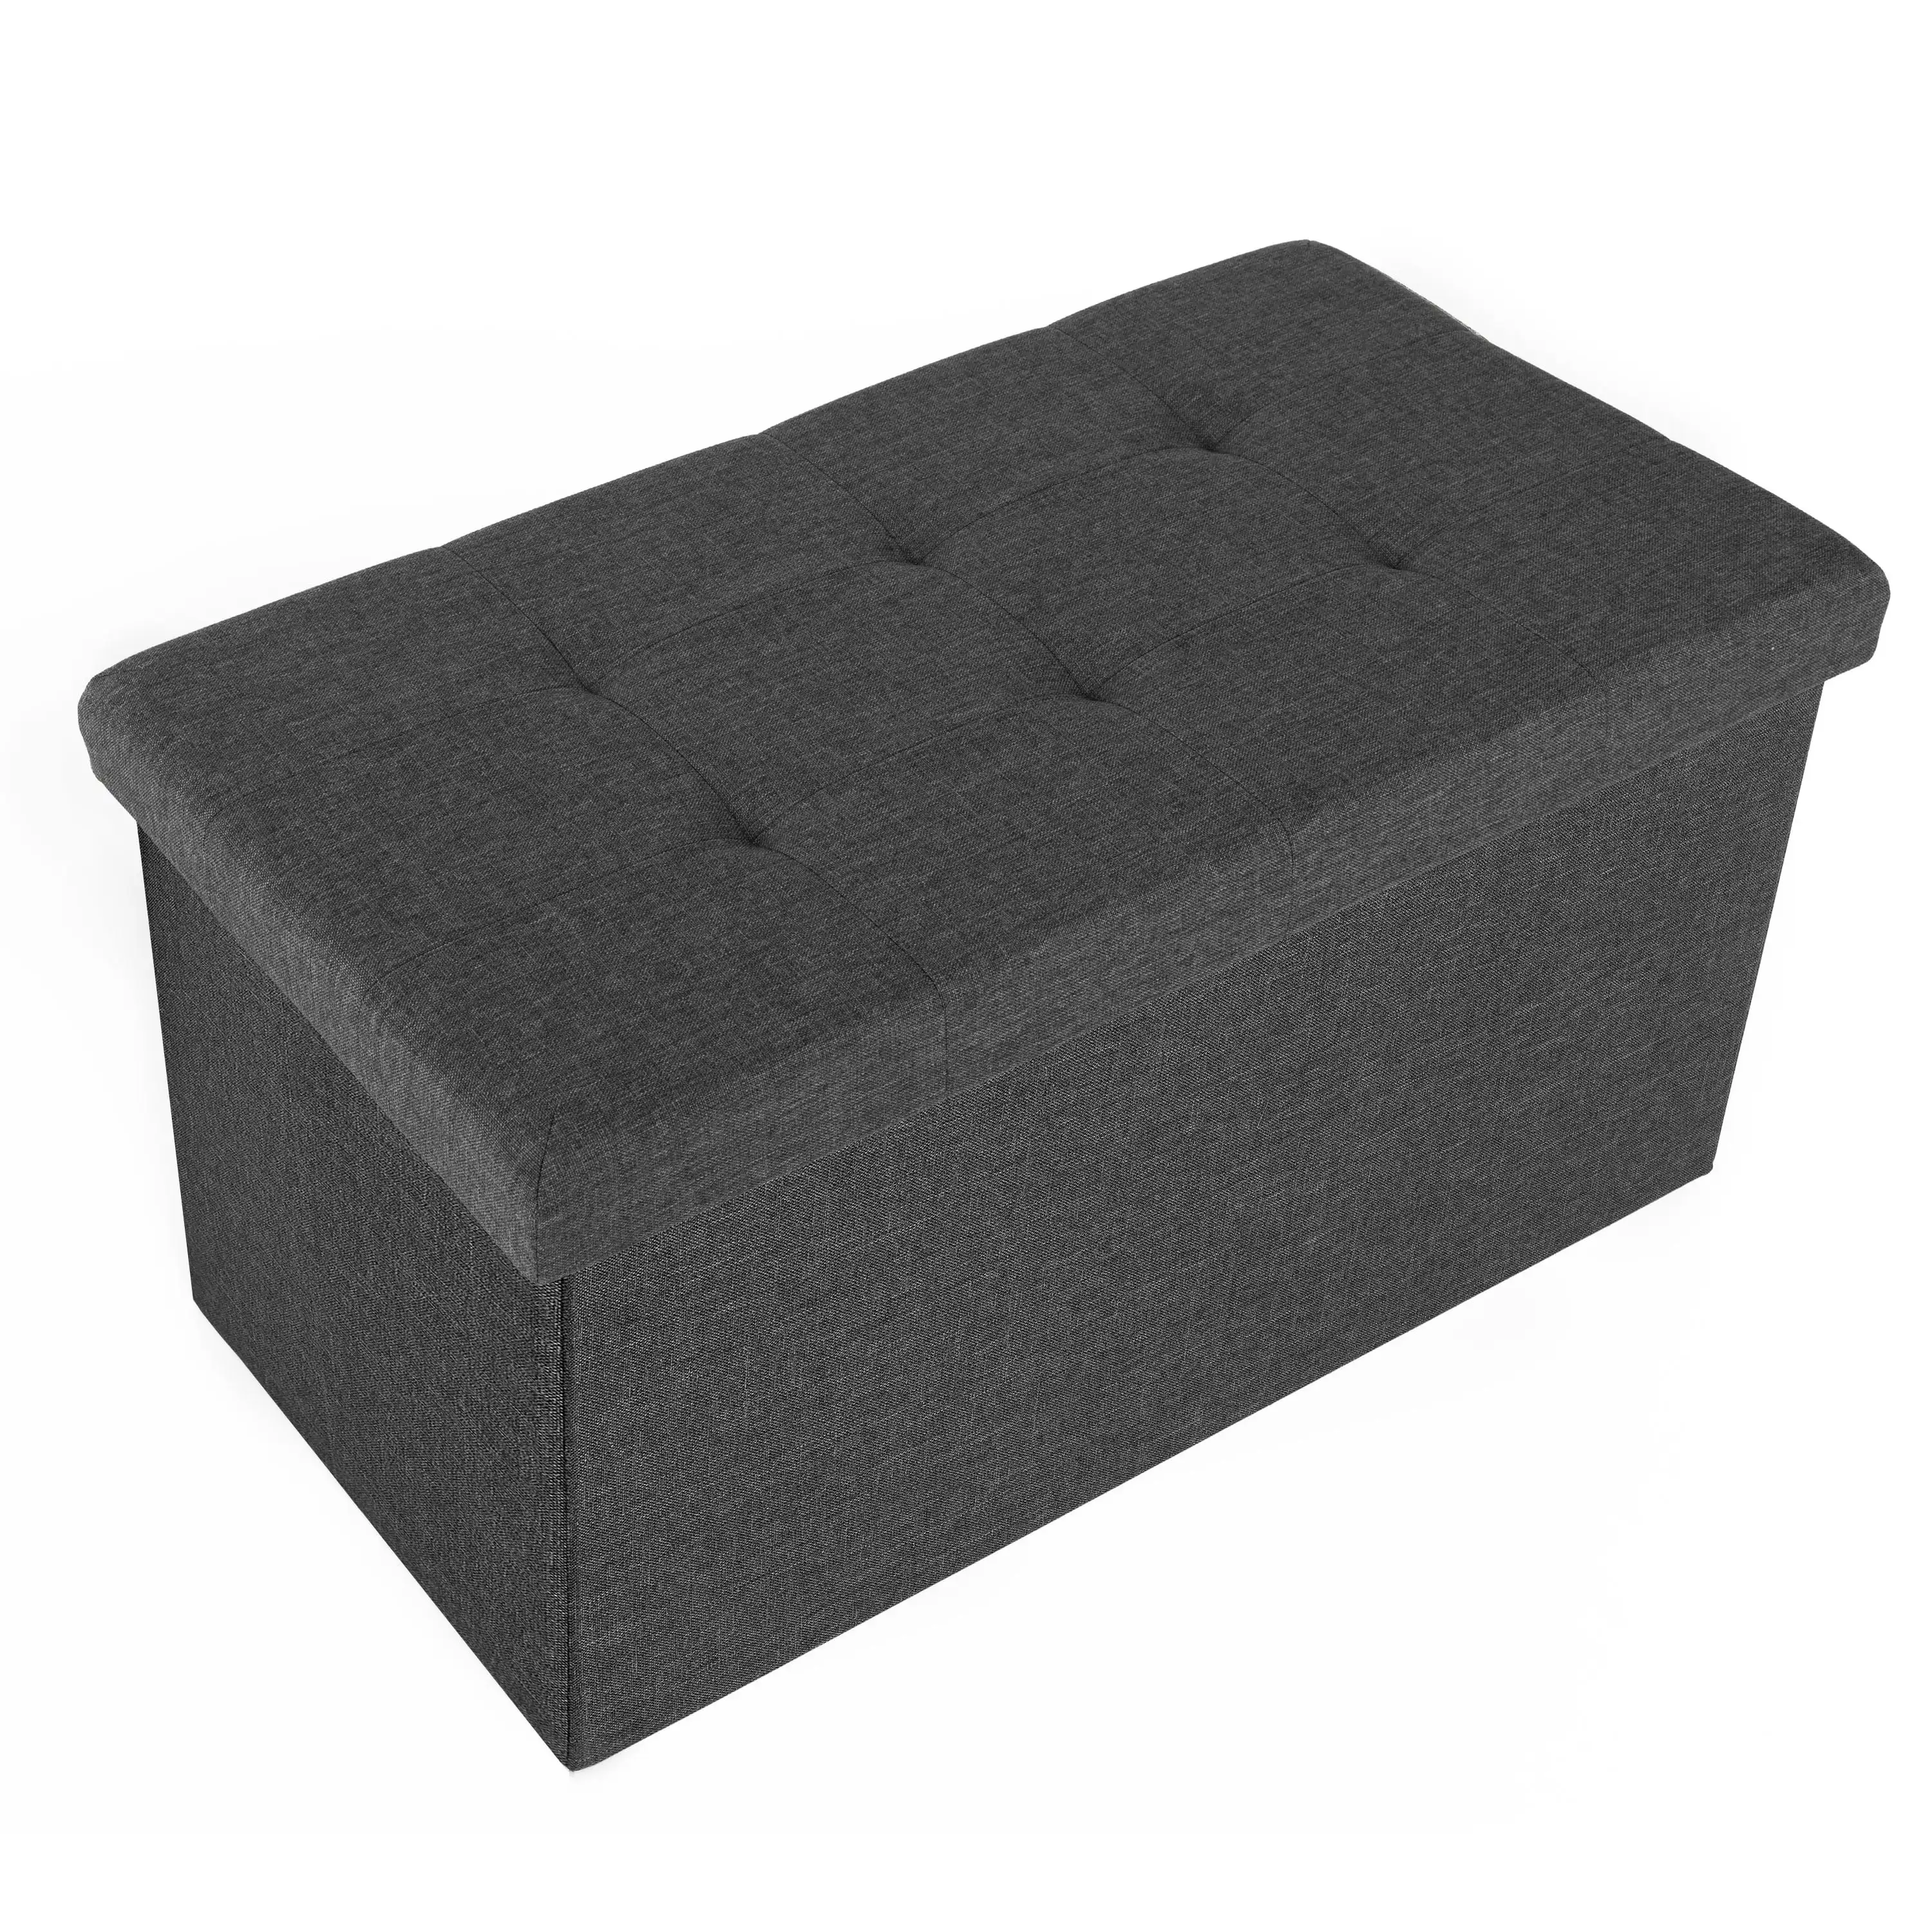 

Seville Classics Cushioned Fabric Ottoman Hidden Storage Chest Footrest Chair, Padded Seat, Modern Gray, 30" Bench